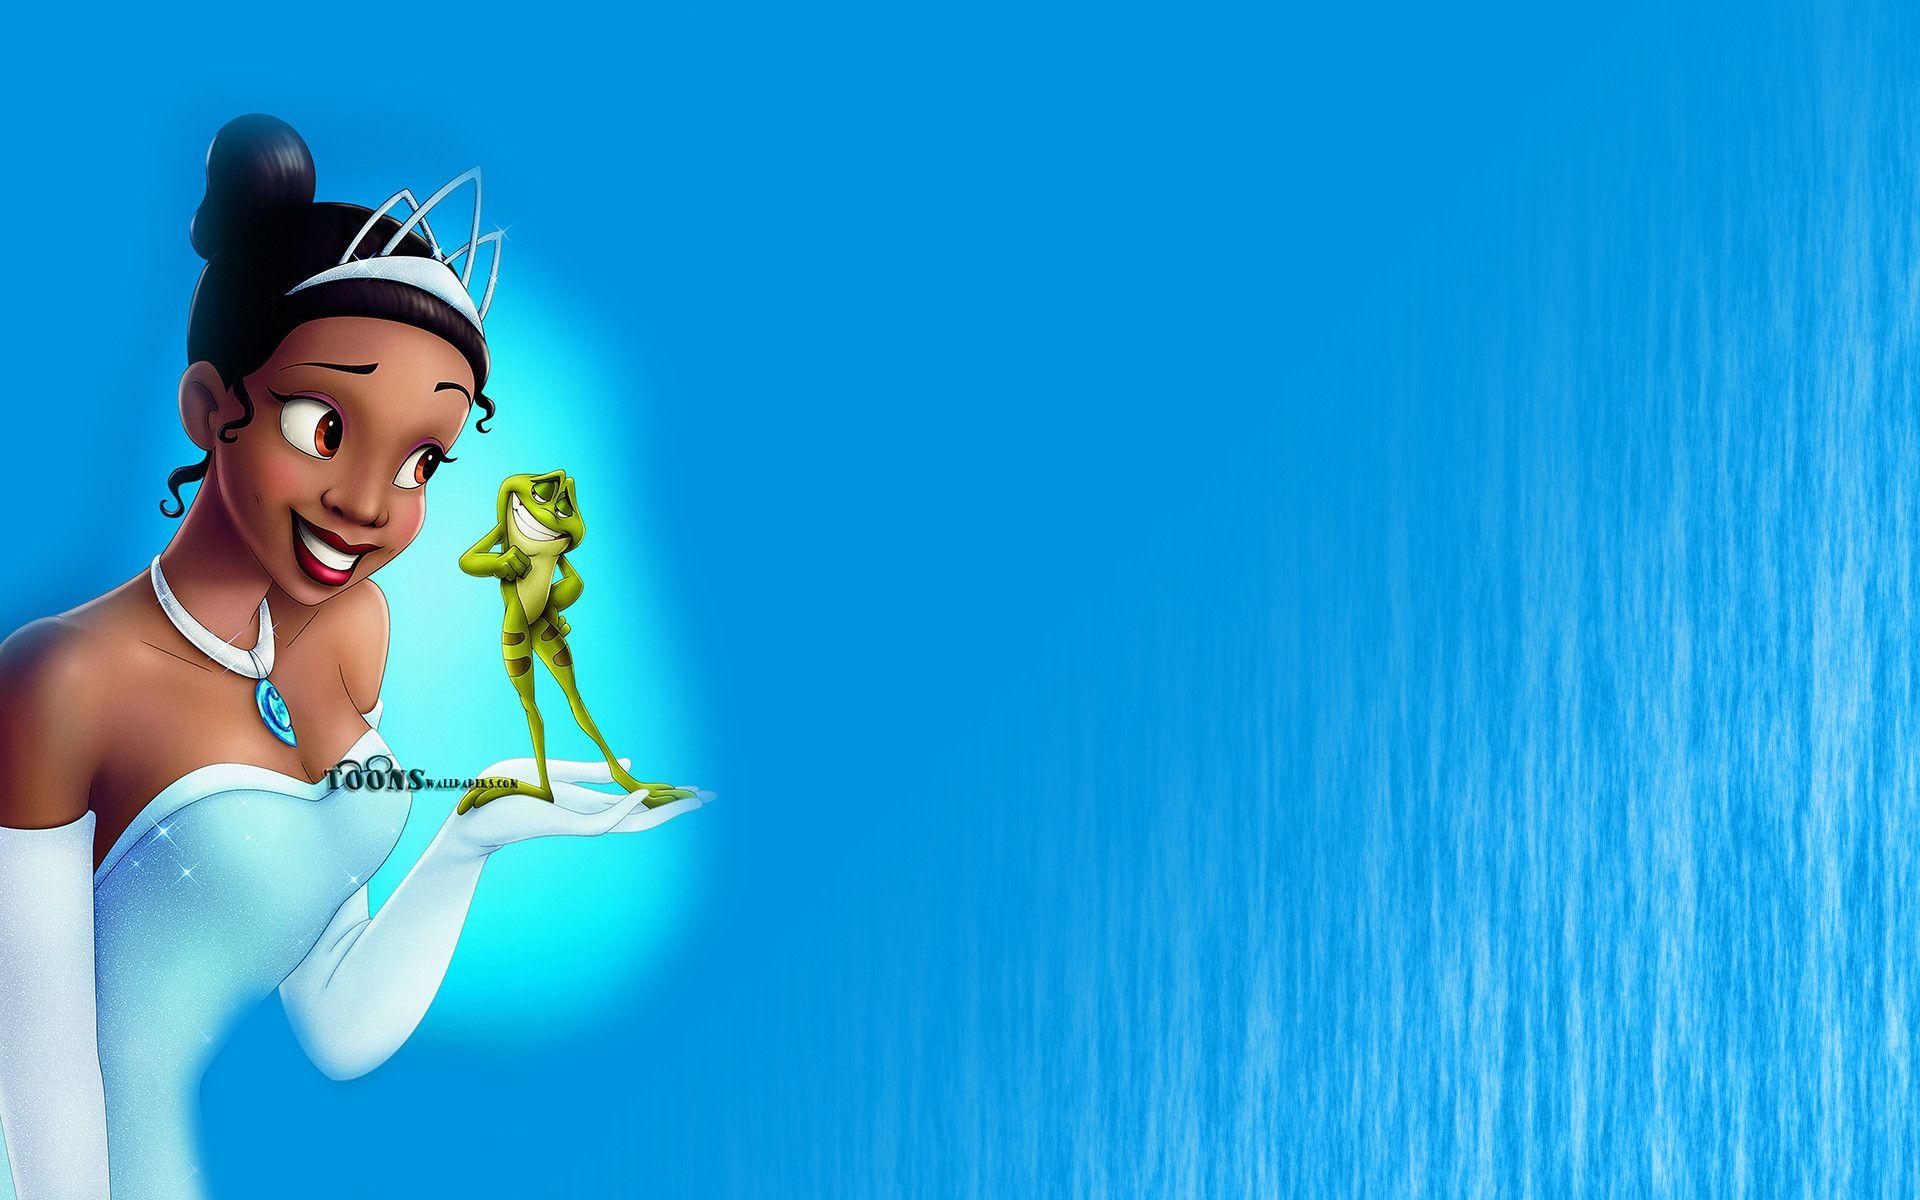 Wallpaper And Background Photos Of Princess Tiana For  Disney Princess PNG  Image  Transparent PNG Free Download on SeekPNG